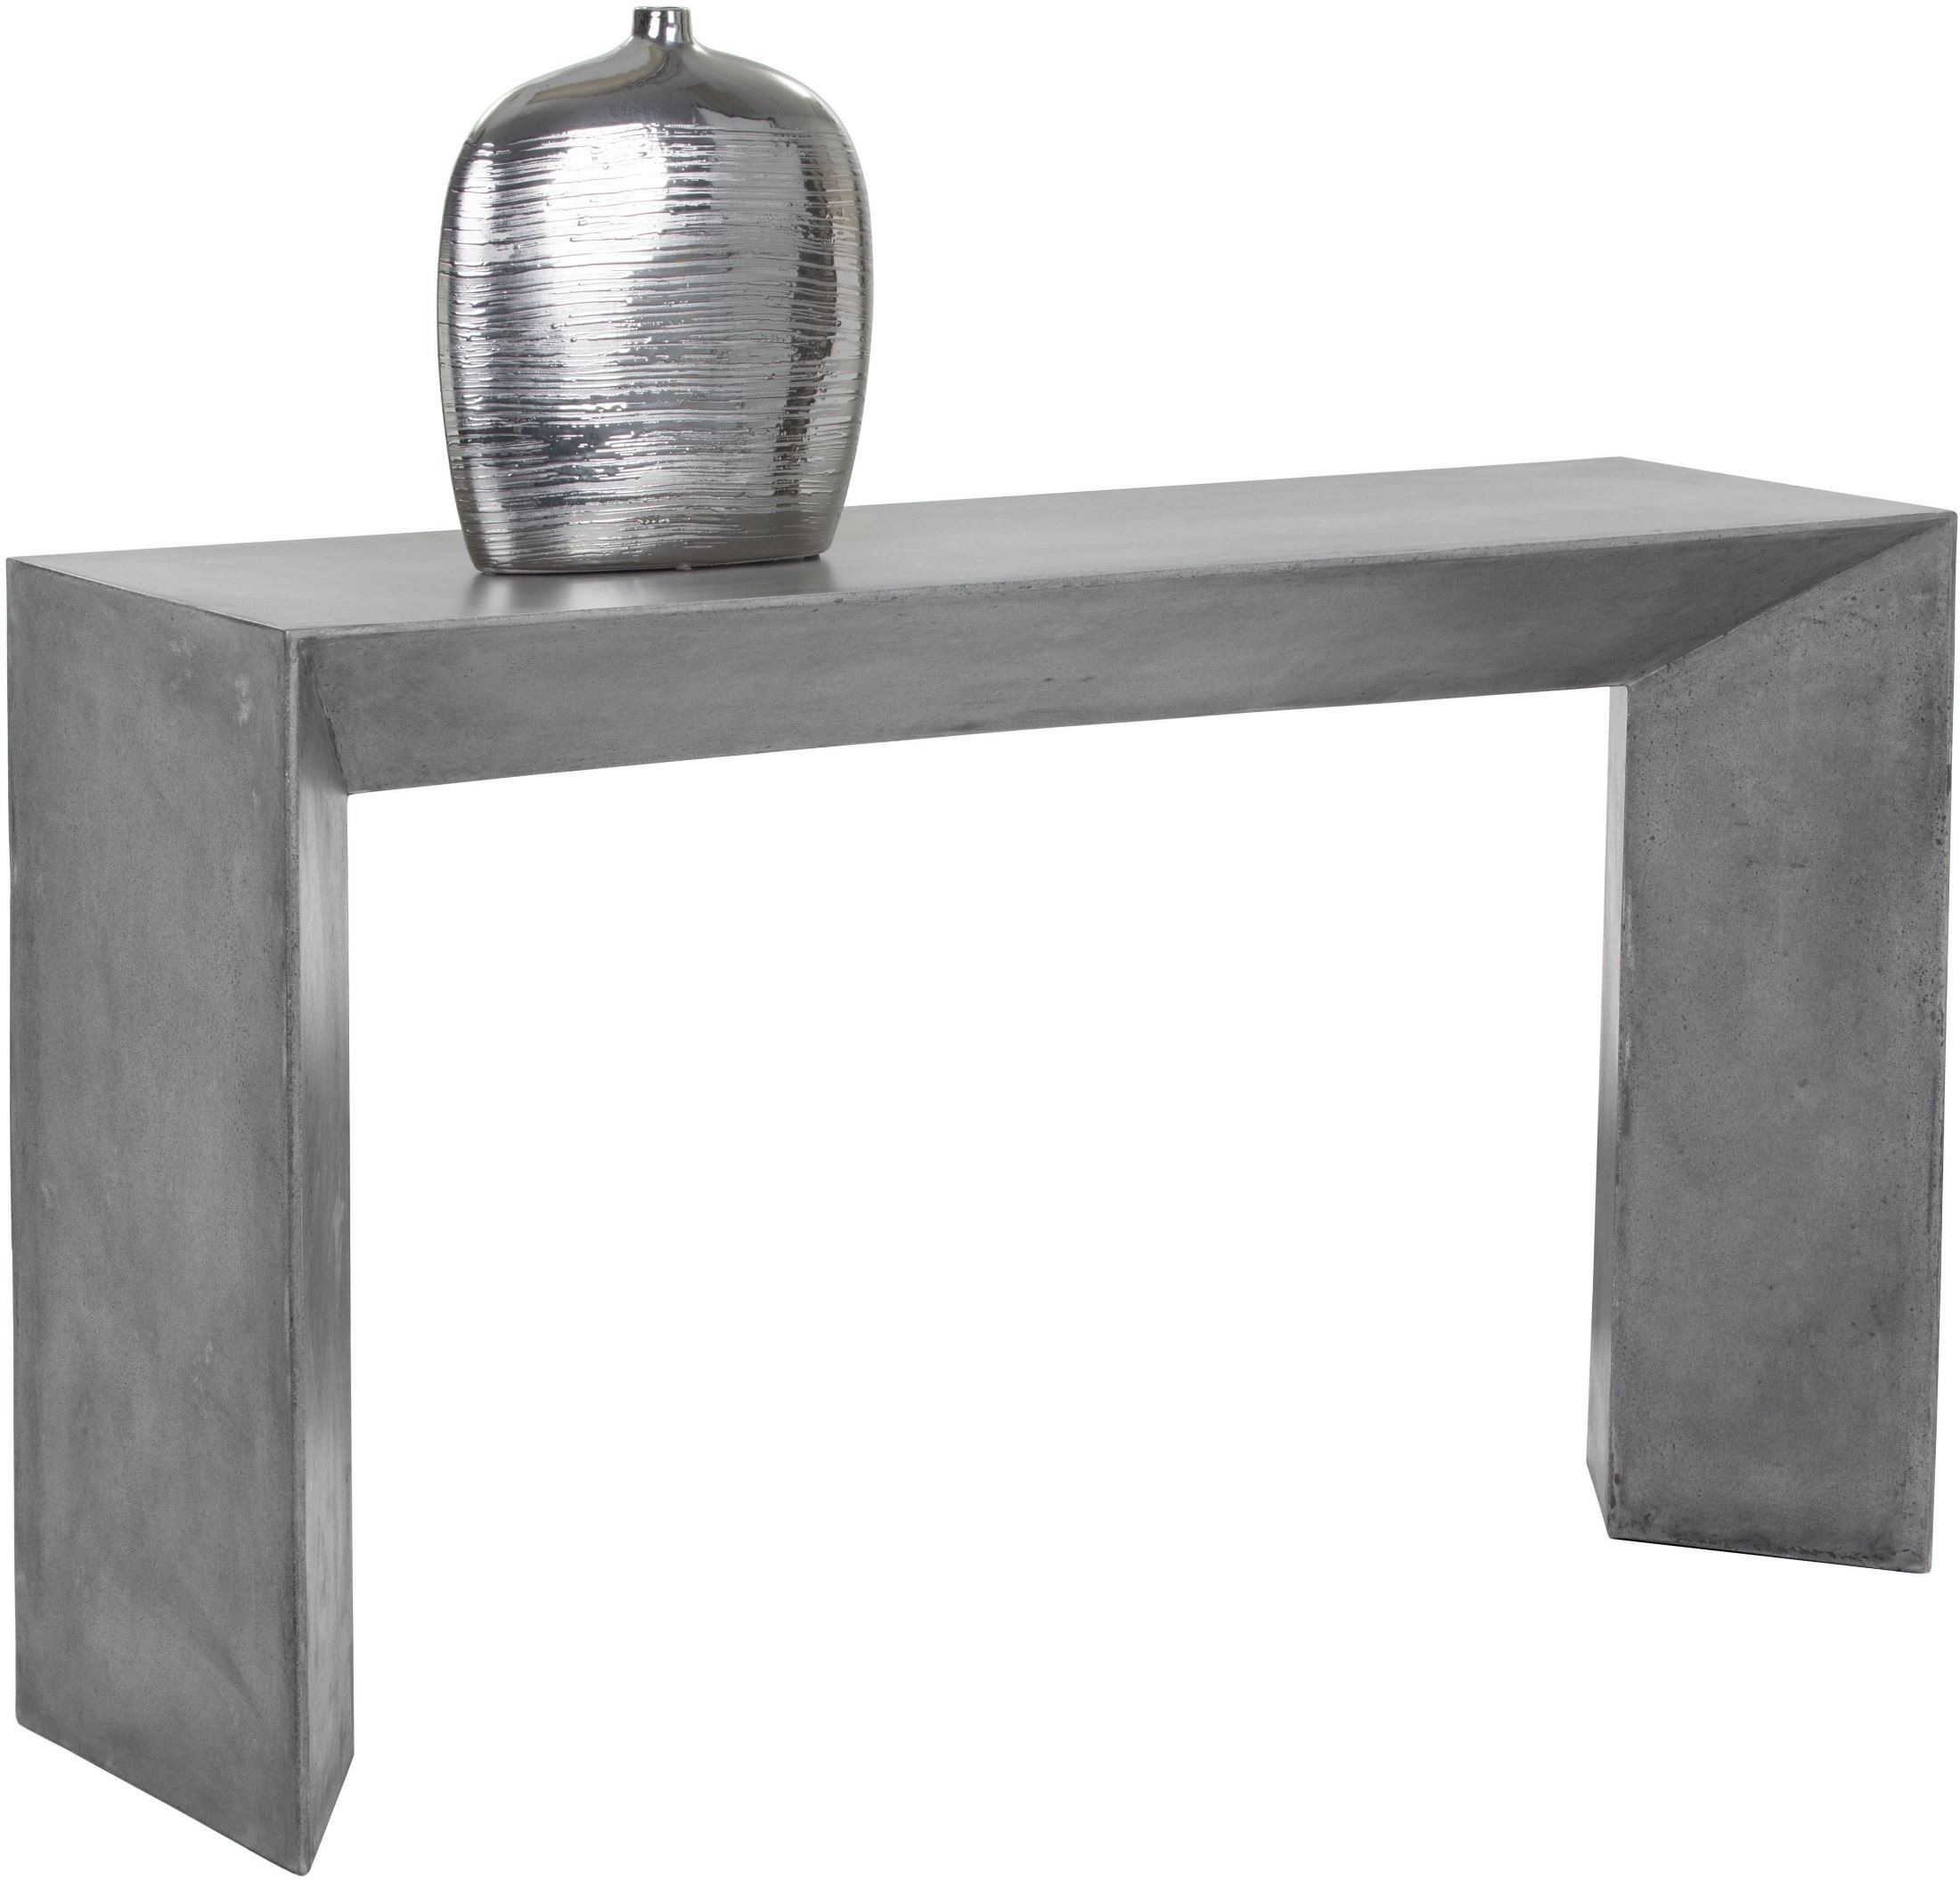 Nomad Grey Concrete Console Table From Sunpan | Coleman Furniture With Gray And Black Console Tables (View 20 of 20)